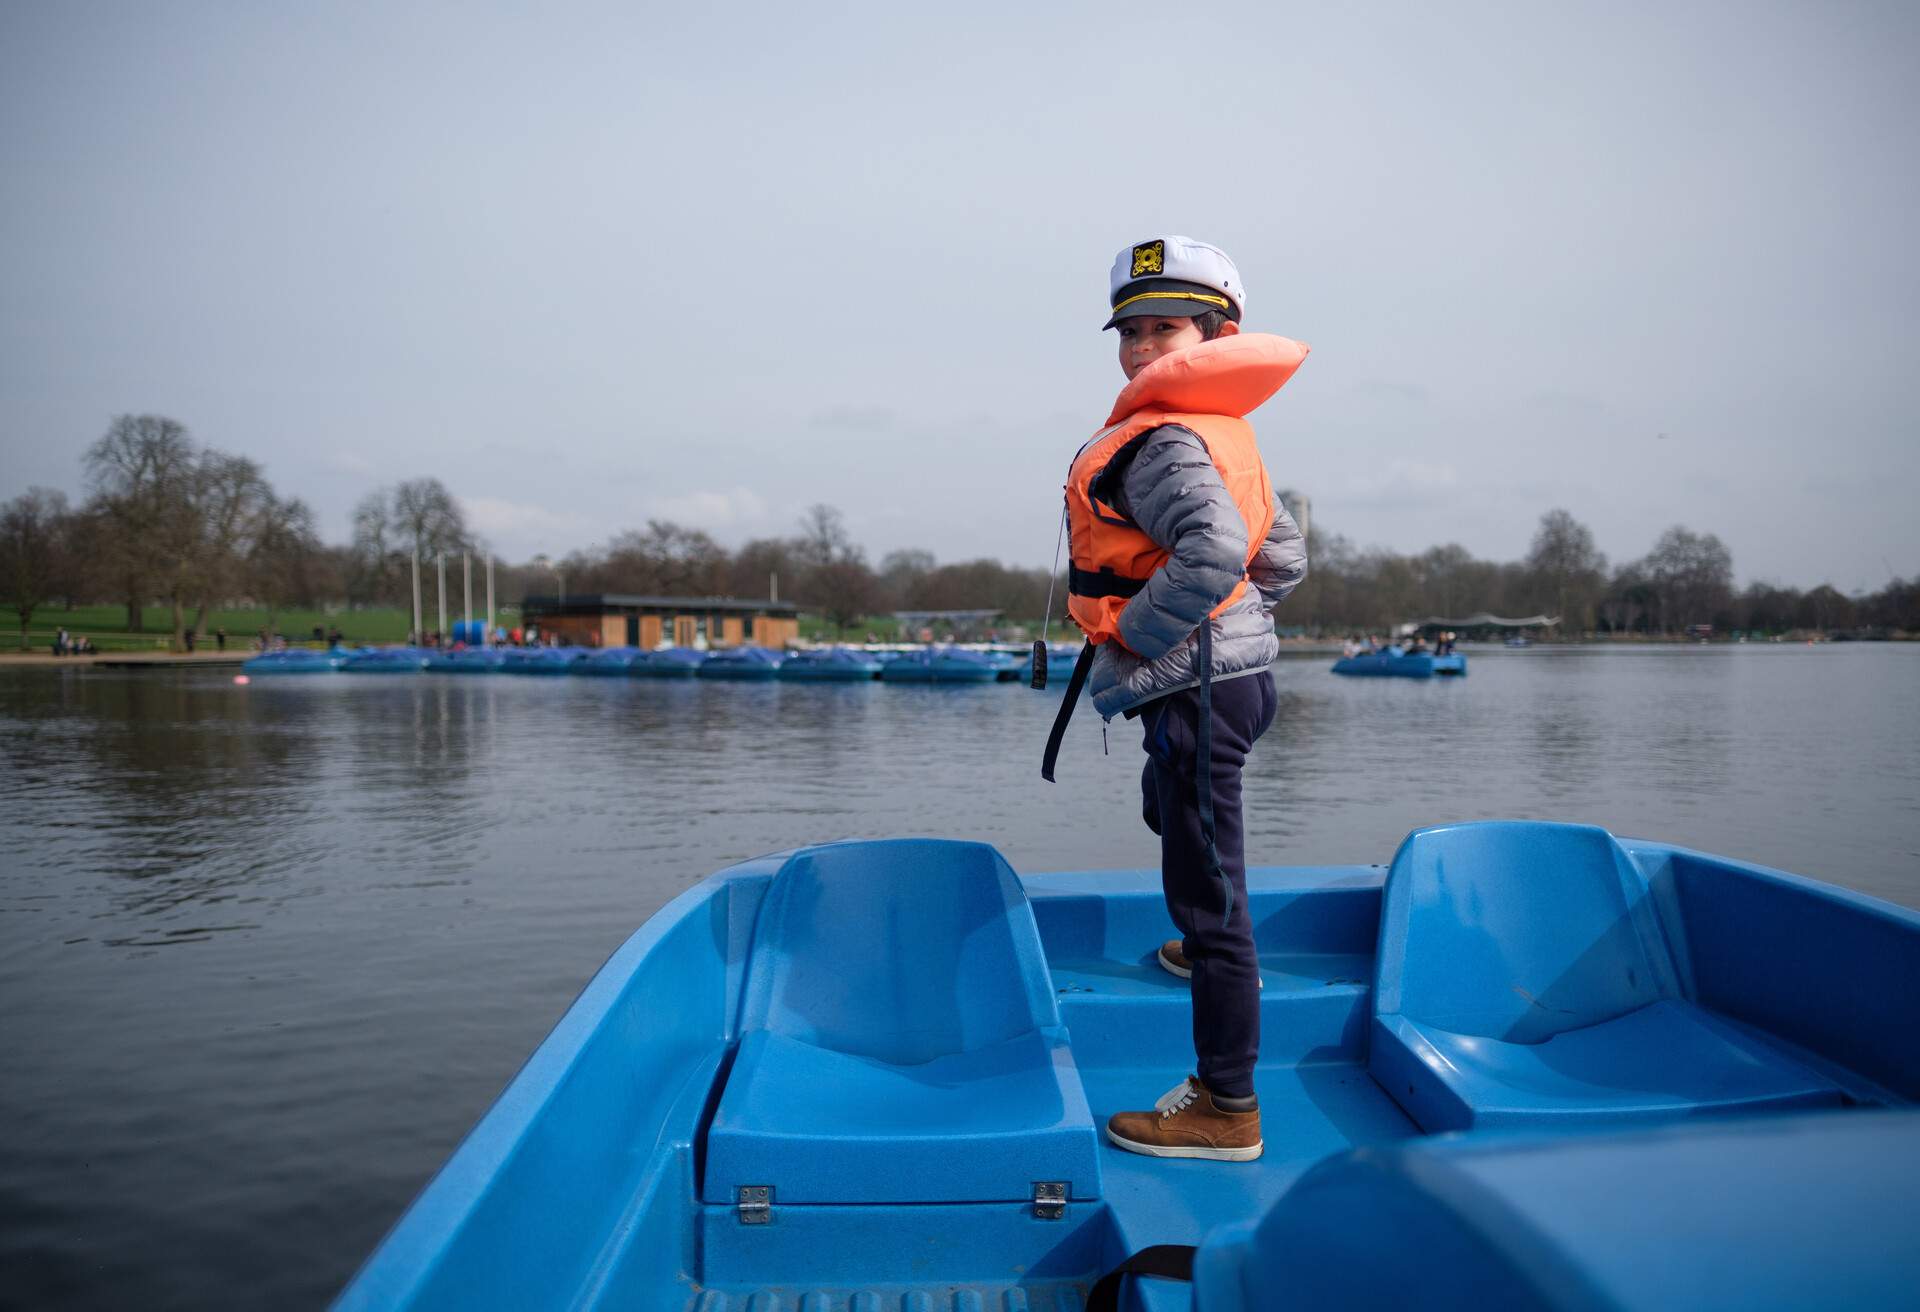 A young boy wearing a life jacket and sailors hat standing up at the prow of a pedalo boat on The Serpentine lake in Hyde Park, London.